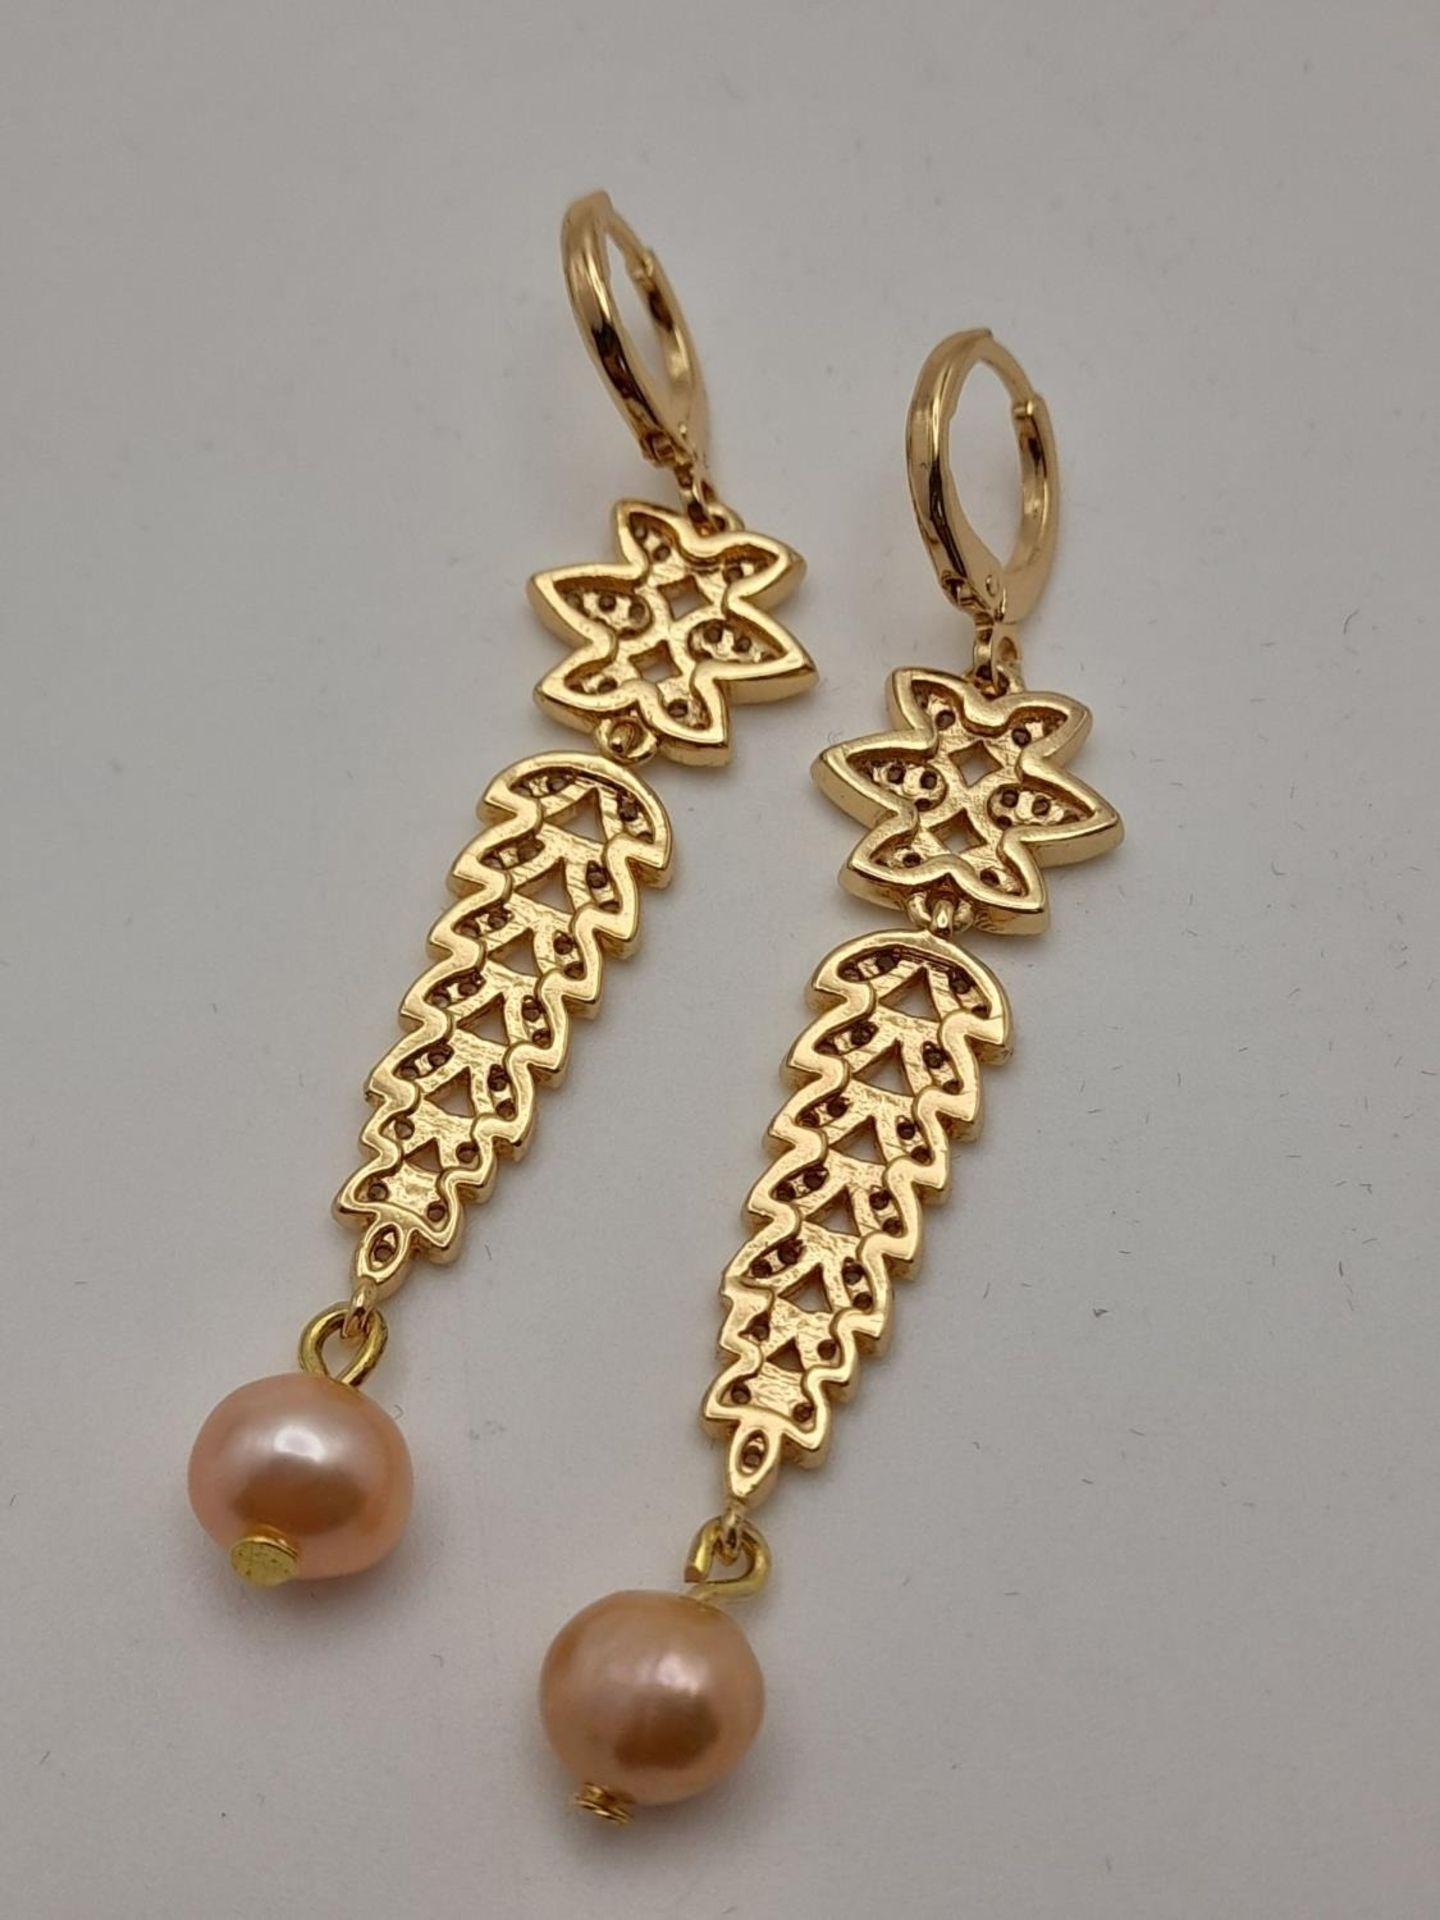 A fabulous gold-plated pair of earrings with cubic zirconia and pink cultured pearls, presented in a - Image 4 of 5